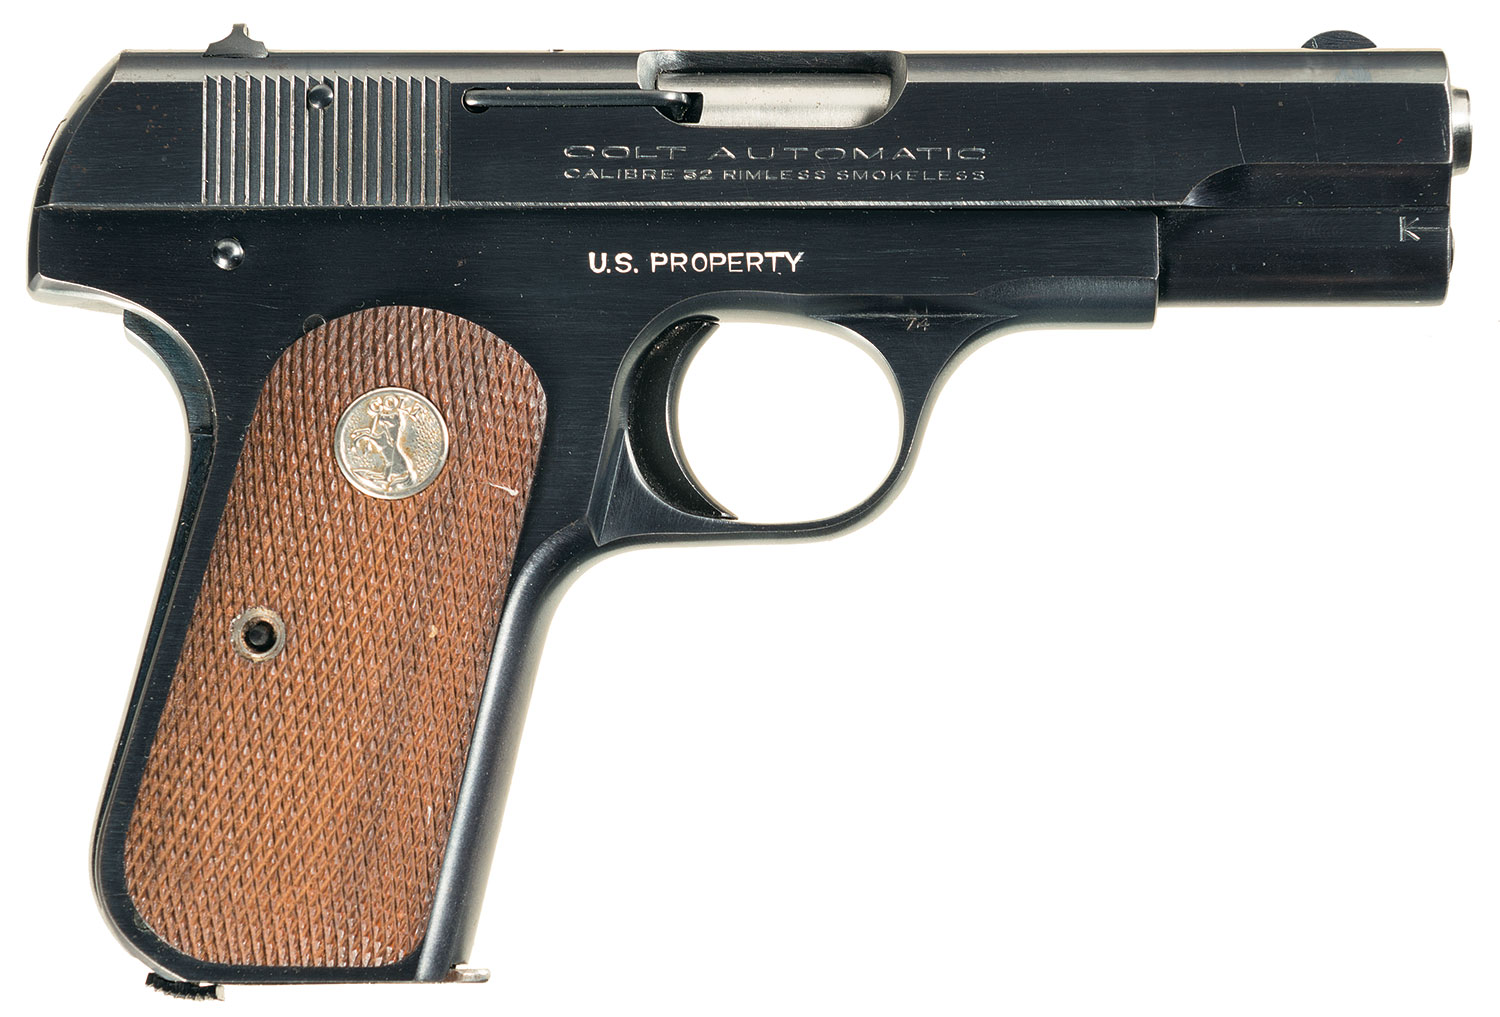 Lot 1680: Exceptional U.S. Property Marked Colt Model 1908 .380 Hammerless Pocket Automatic Pistol with Ammunition Pouch and Spare Magazines